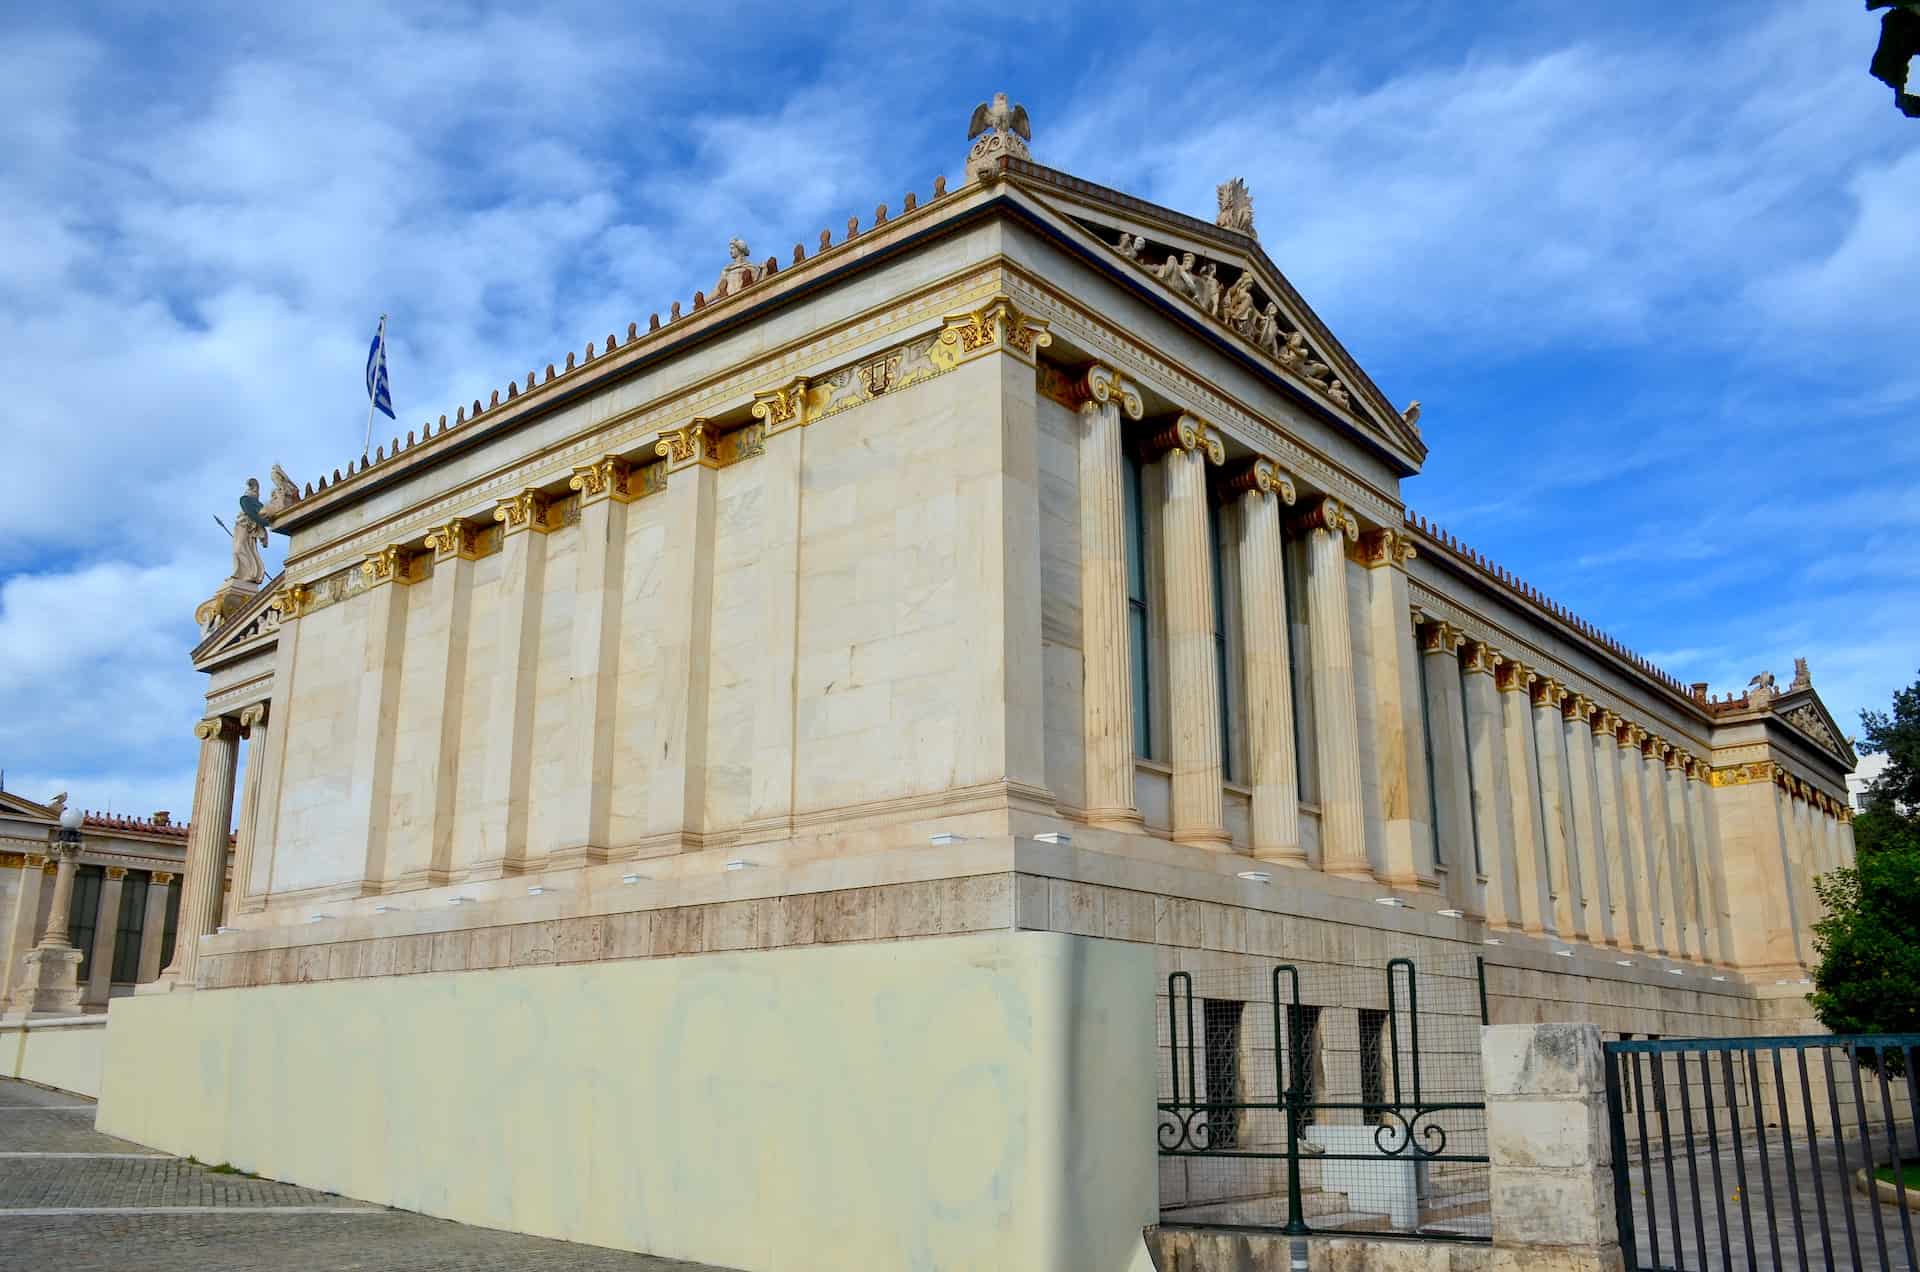 South wing of the Academy of Athens